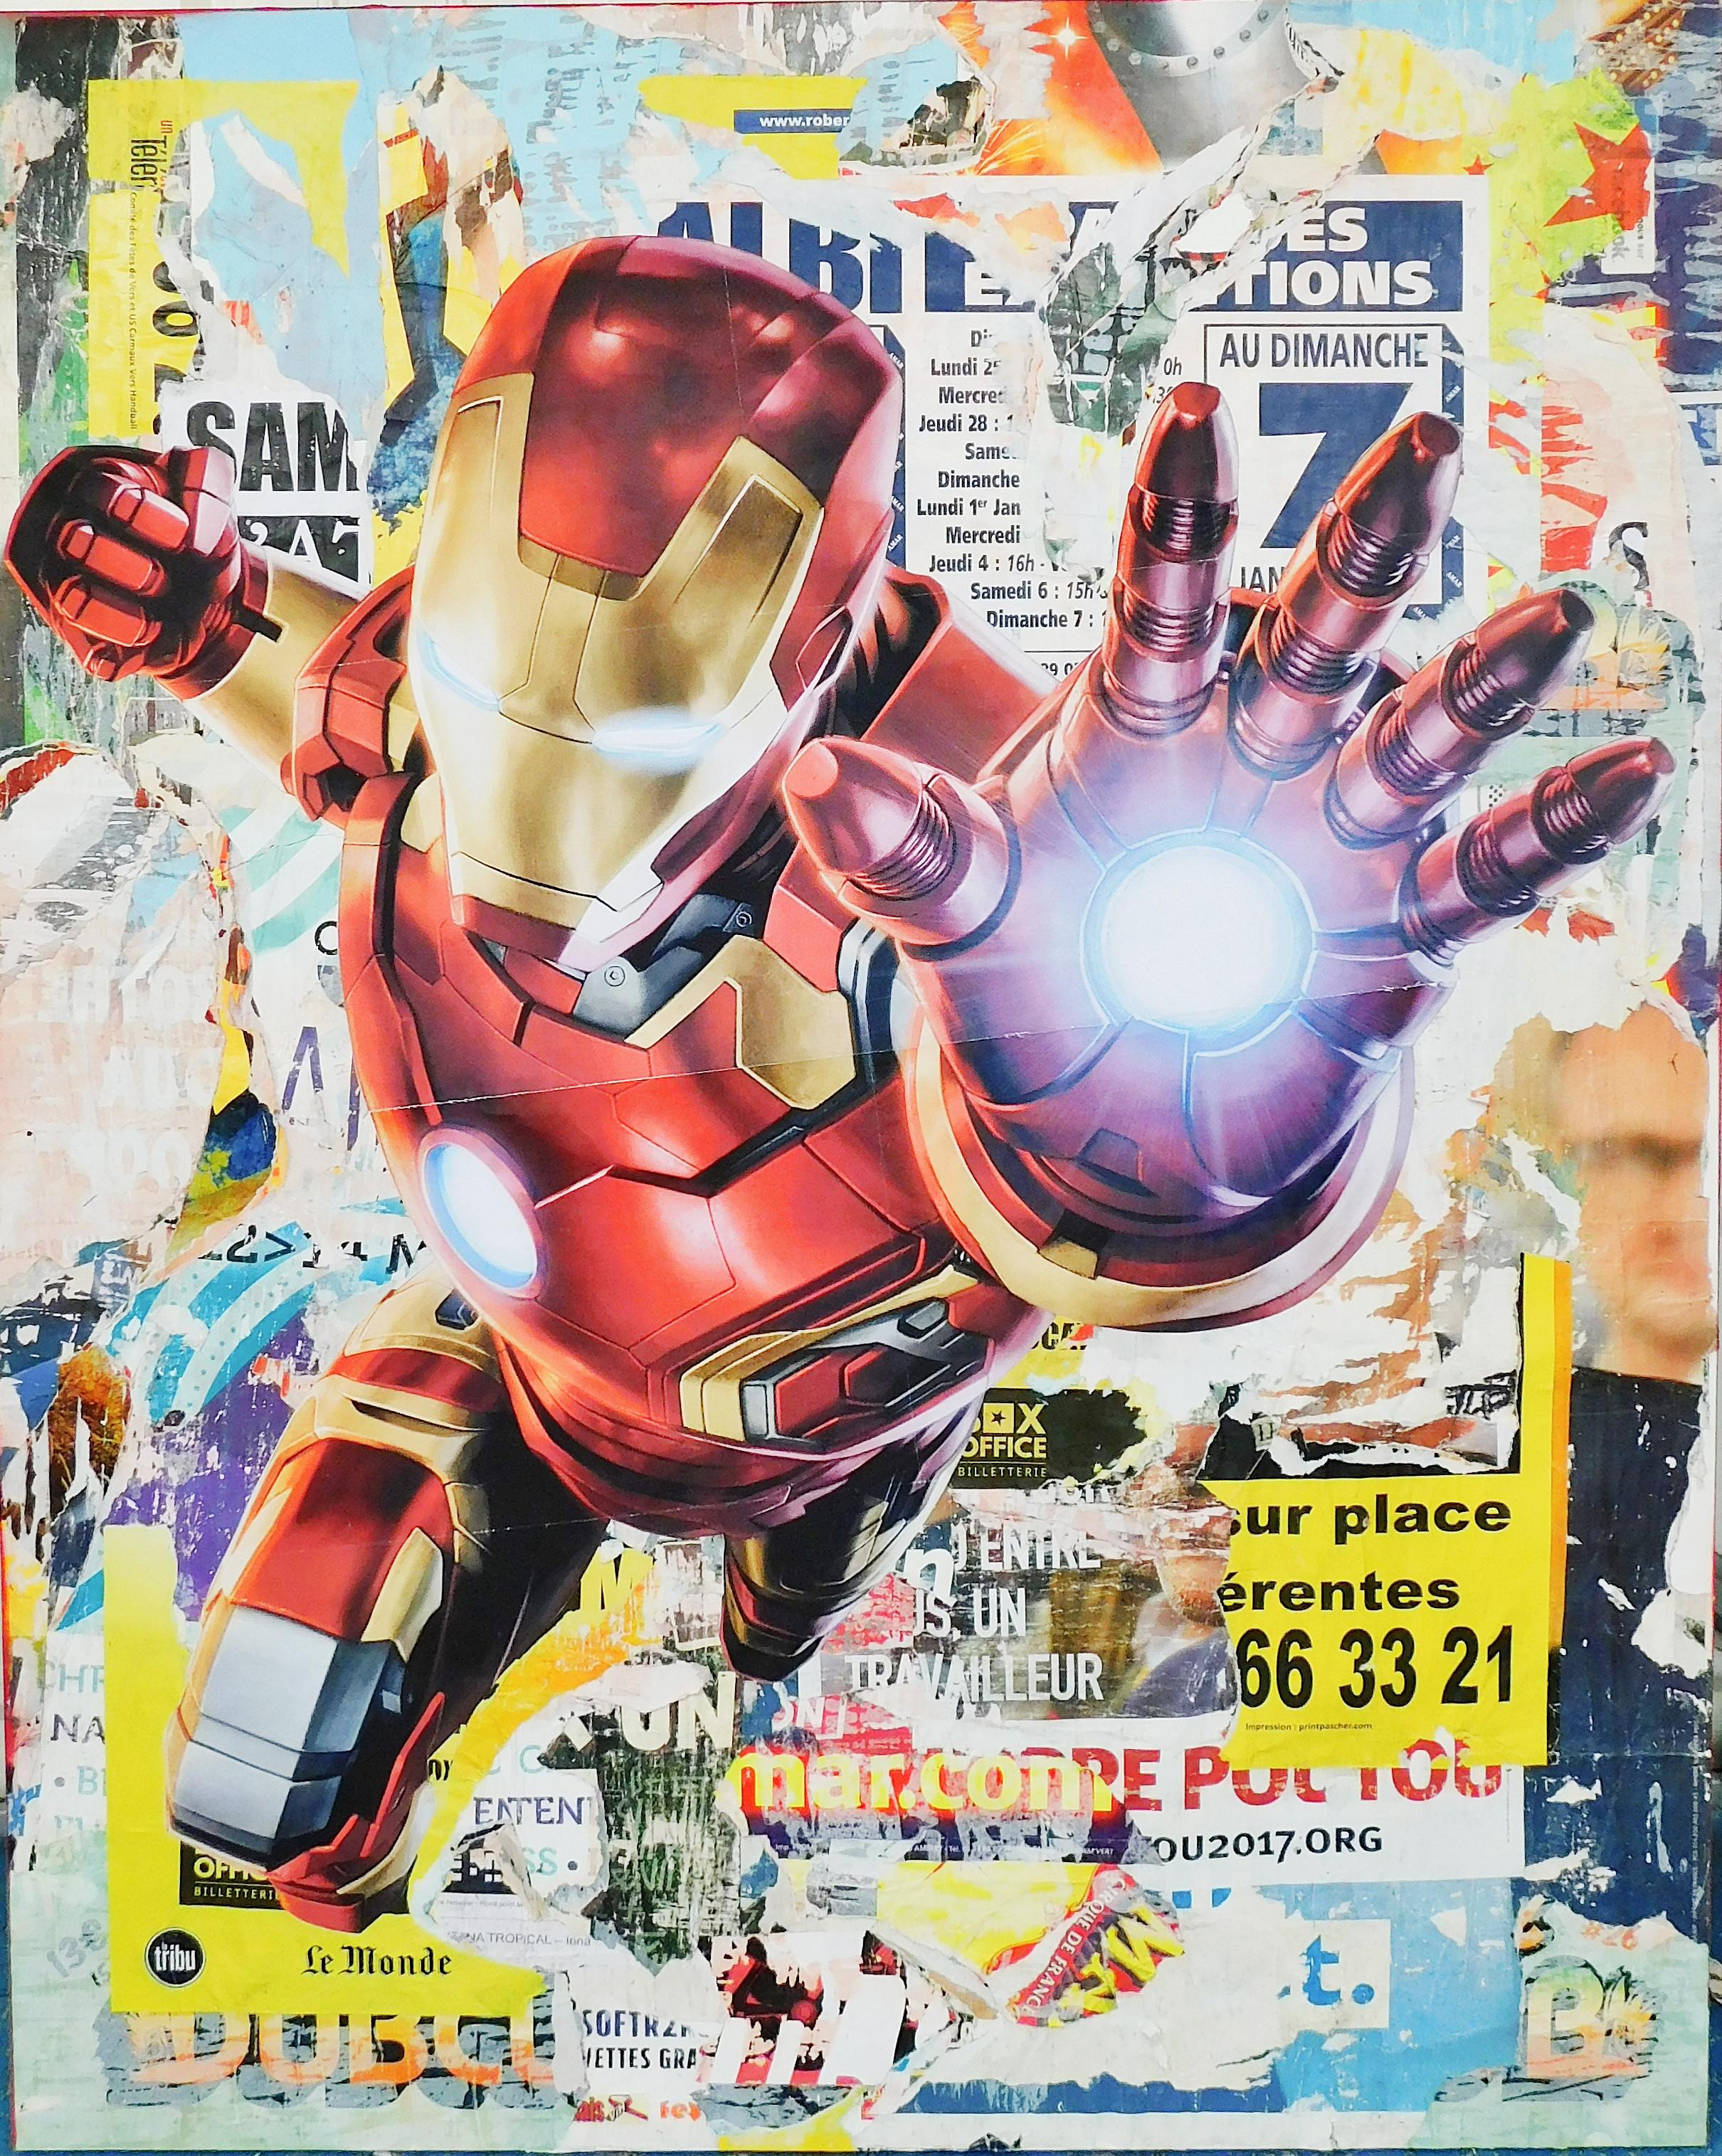 Ironman - Decollage on canvas - Mixed Media Art by Manucollage